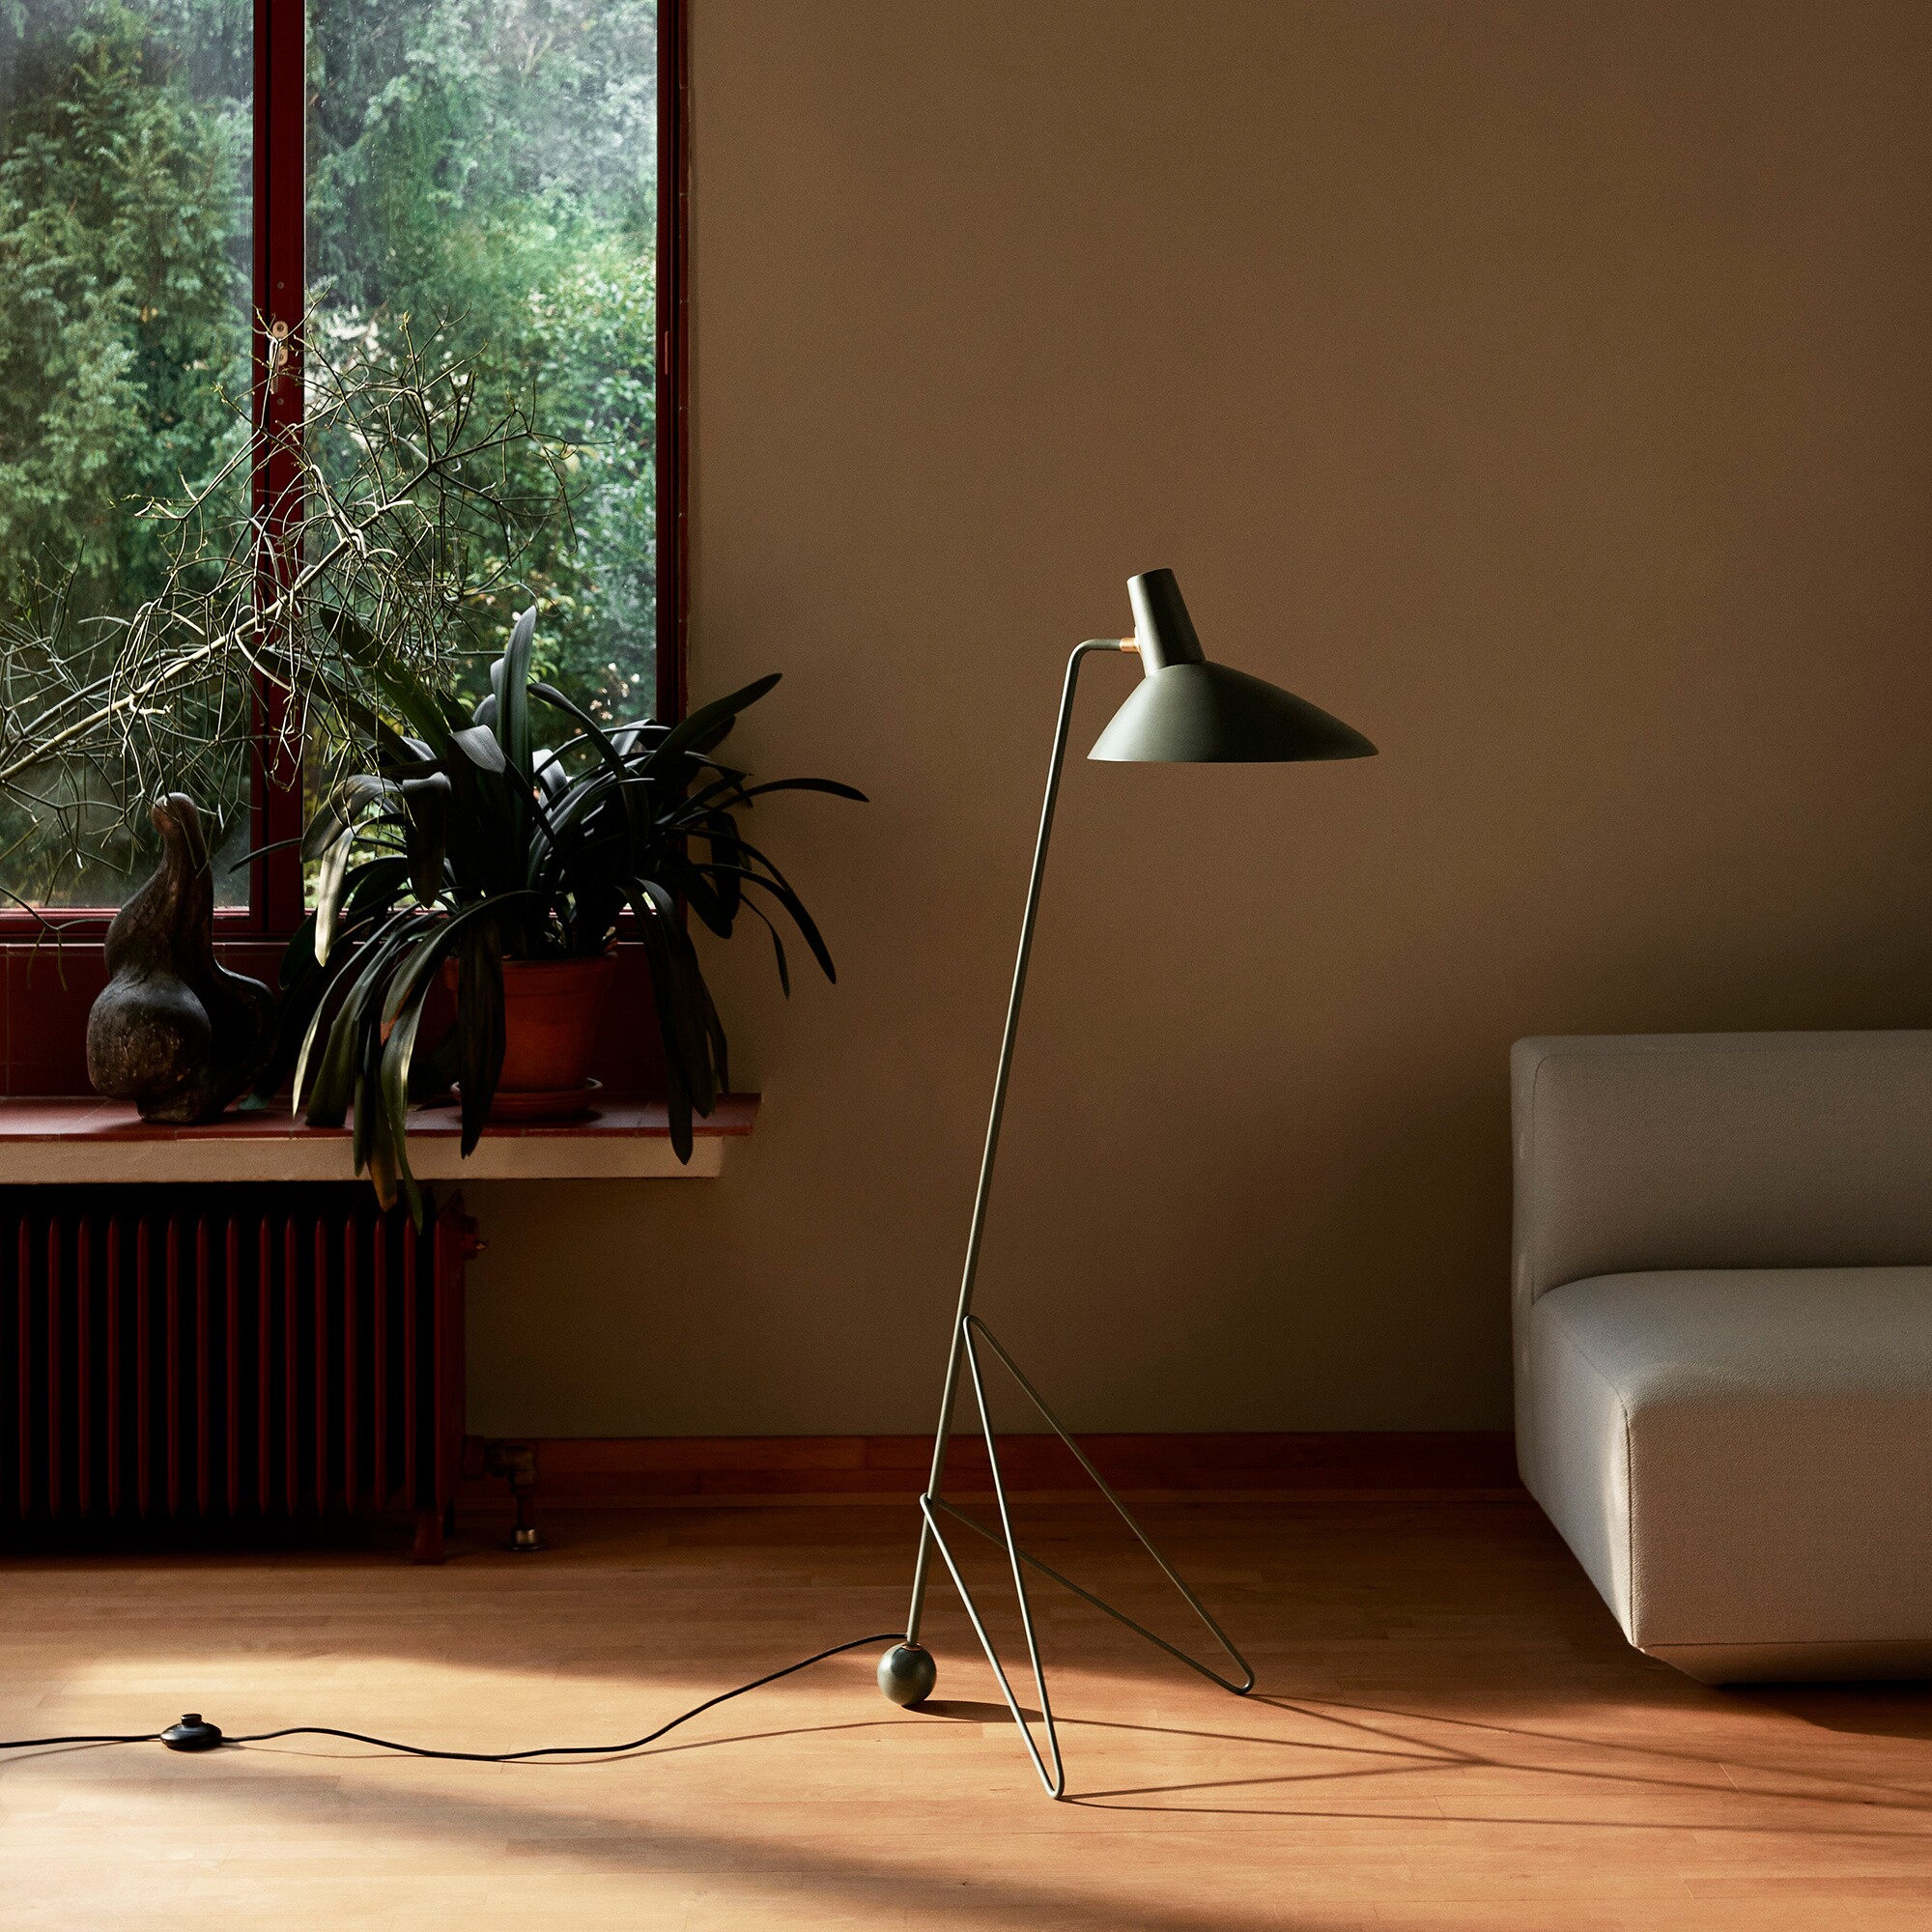 Tradition Tripod Hm8 Floor Lamp, Tripod Floor Lamp And Matching Table